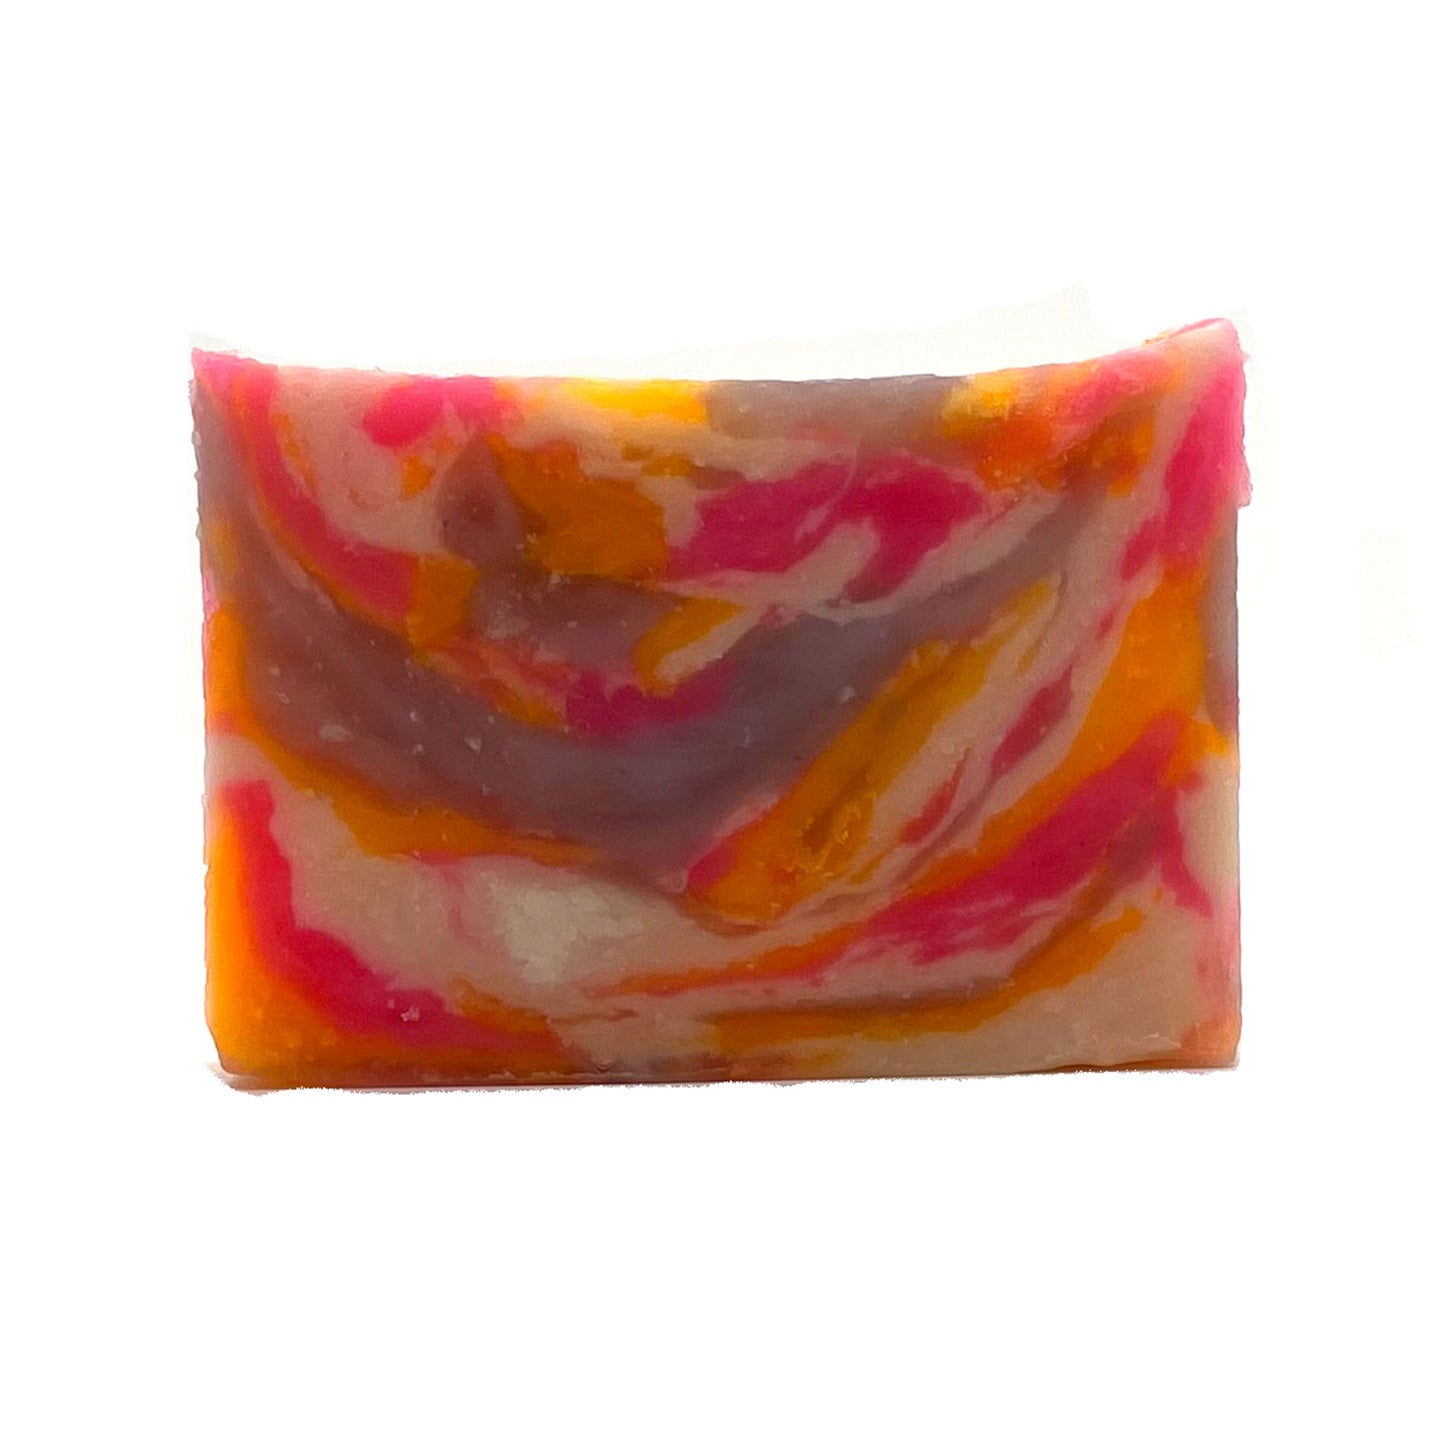 fruit scented soap by JDNatlady's Creations